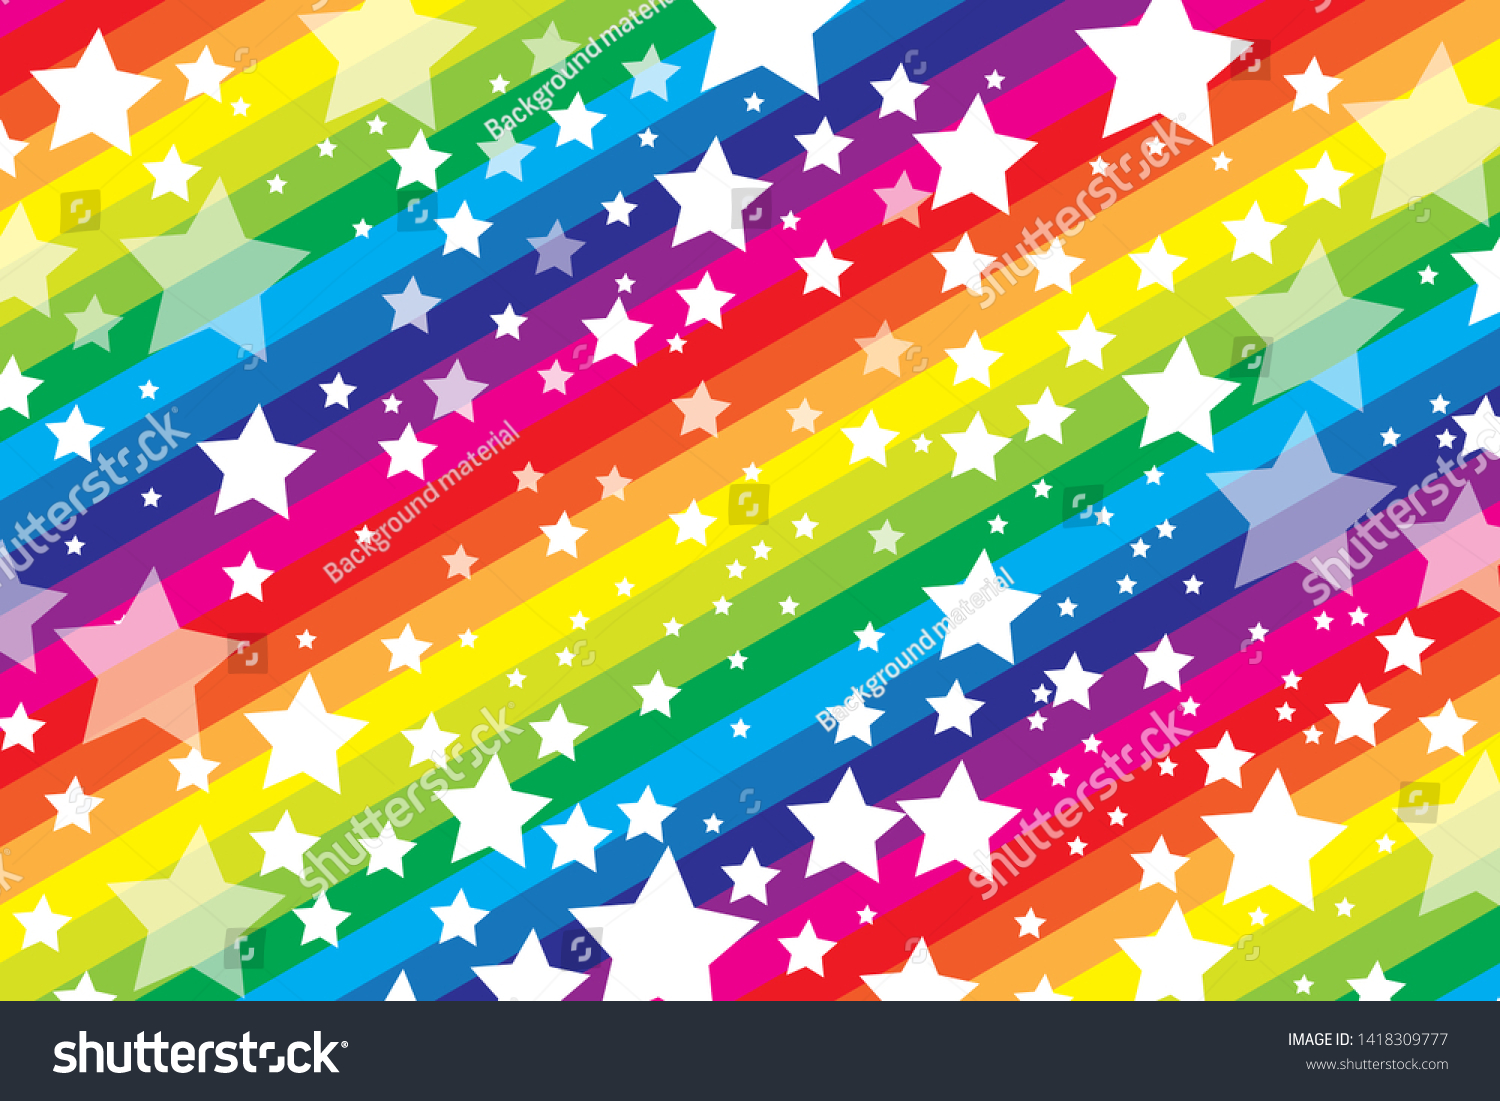 Background Wallpaper Happy Party Image Stardust Stock Vector